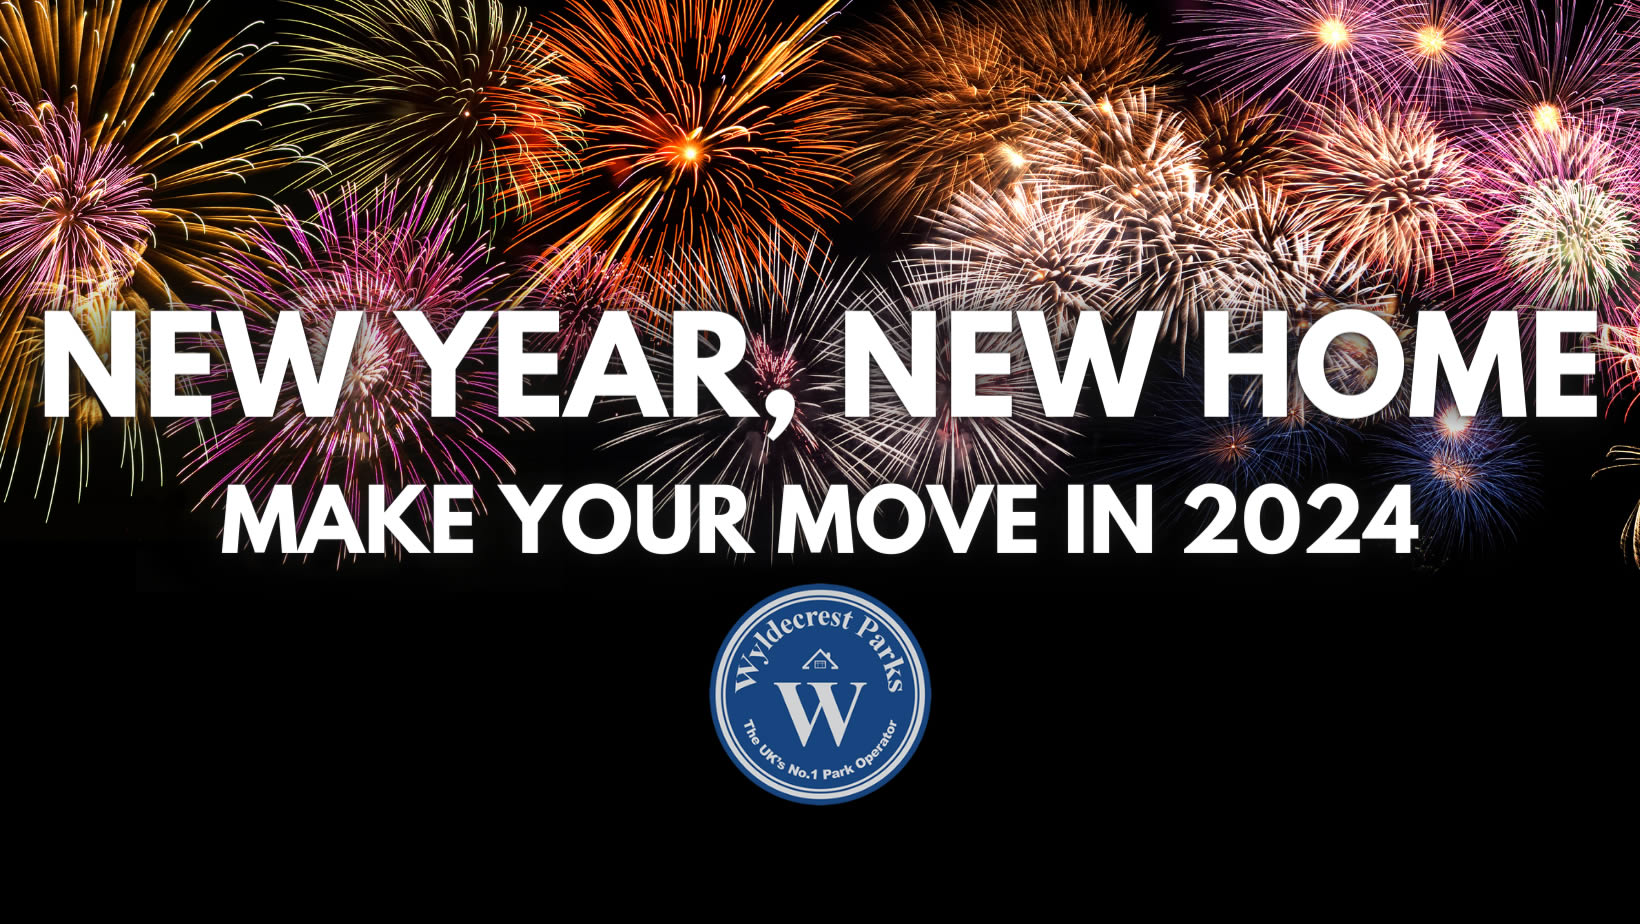 New Year New Home Make Your Move 2024 Midpage Banner